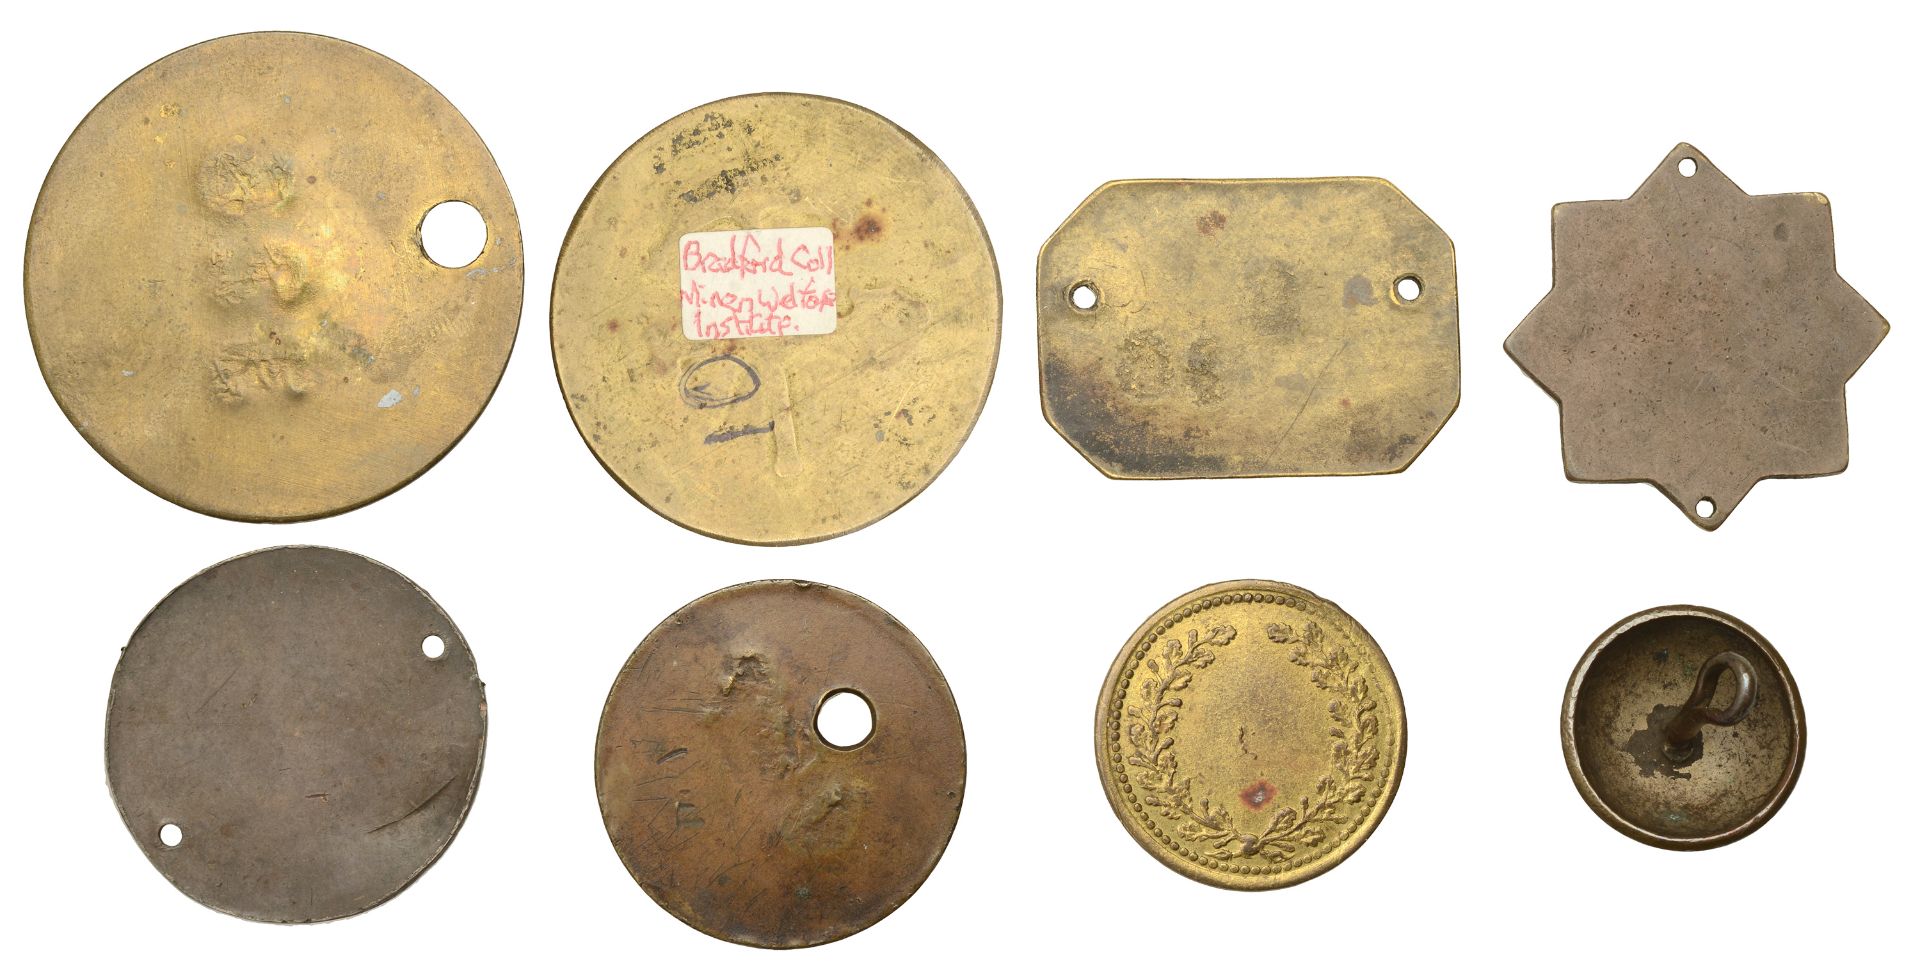 Miscellaneous Tokens and Checks, CHESHIRE, Low Marple, Poynton & Worth Colleries, 1832, plat... - Image 2 of 2